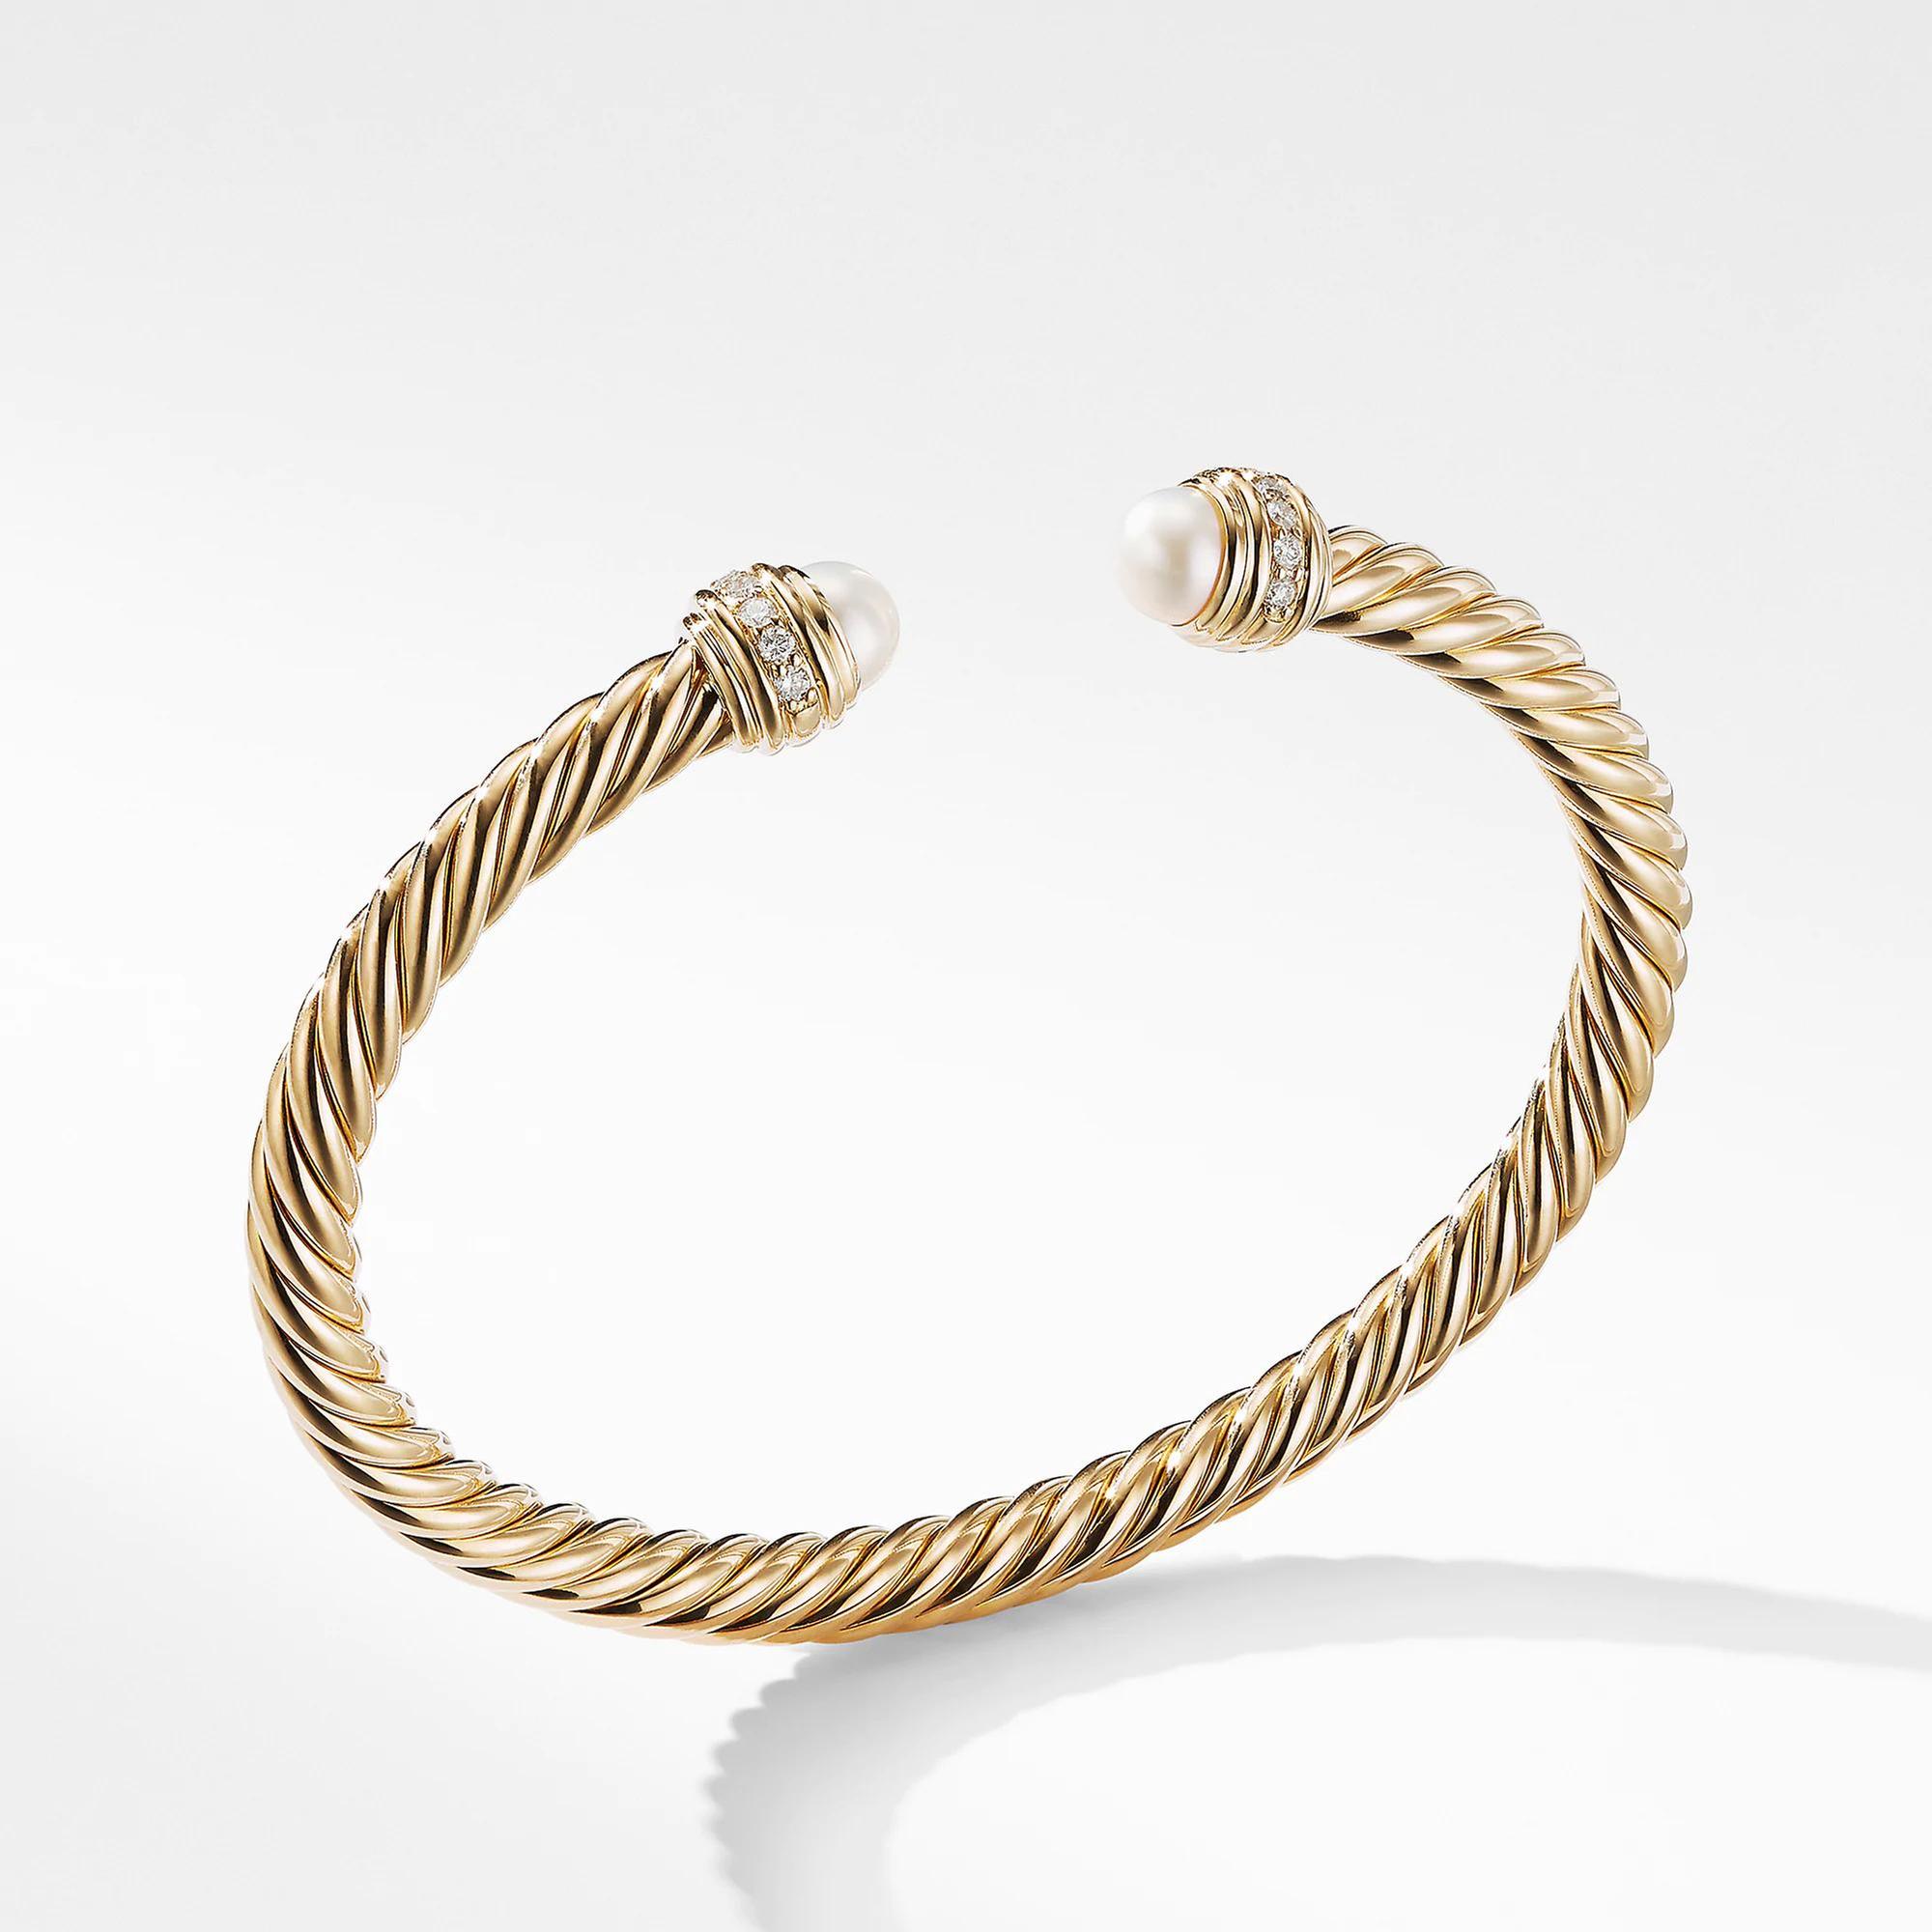 David Yurman Cable Bracelet in 18k Gold with Pearls and Diamonds, 5mm